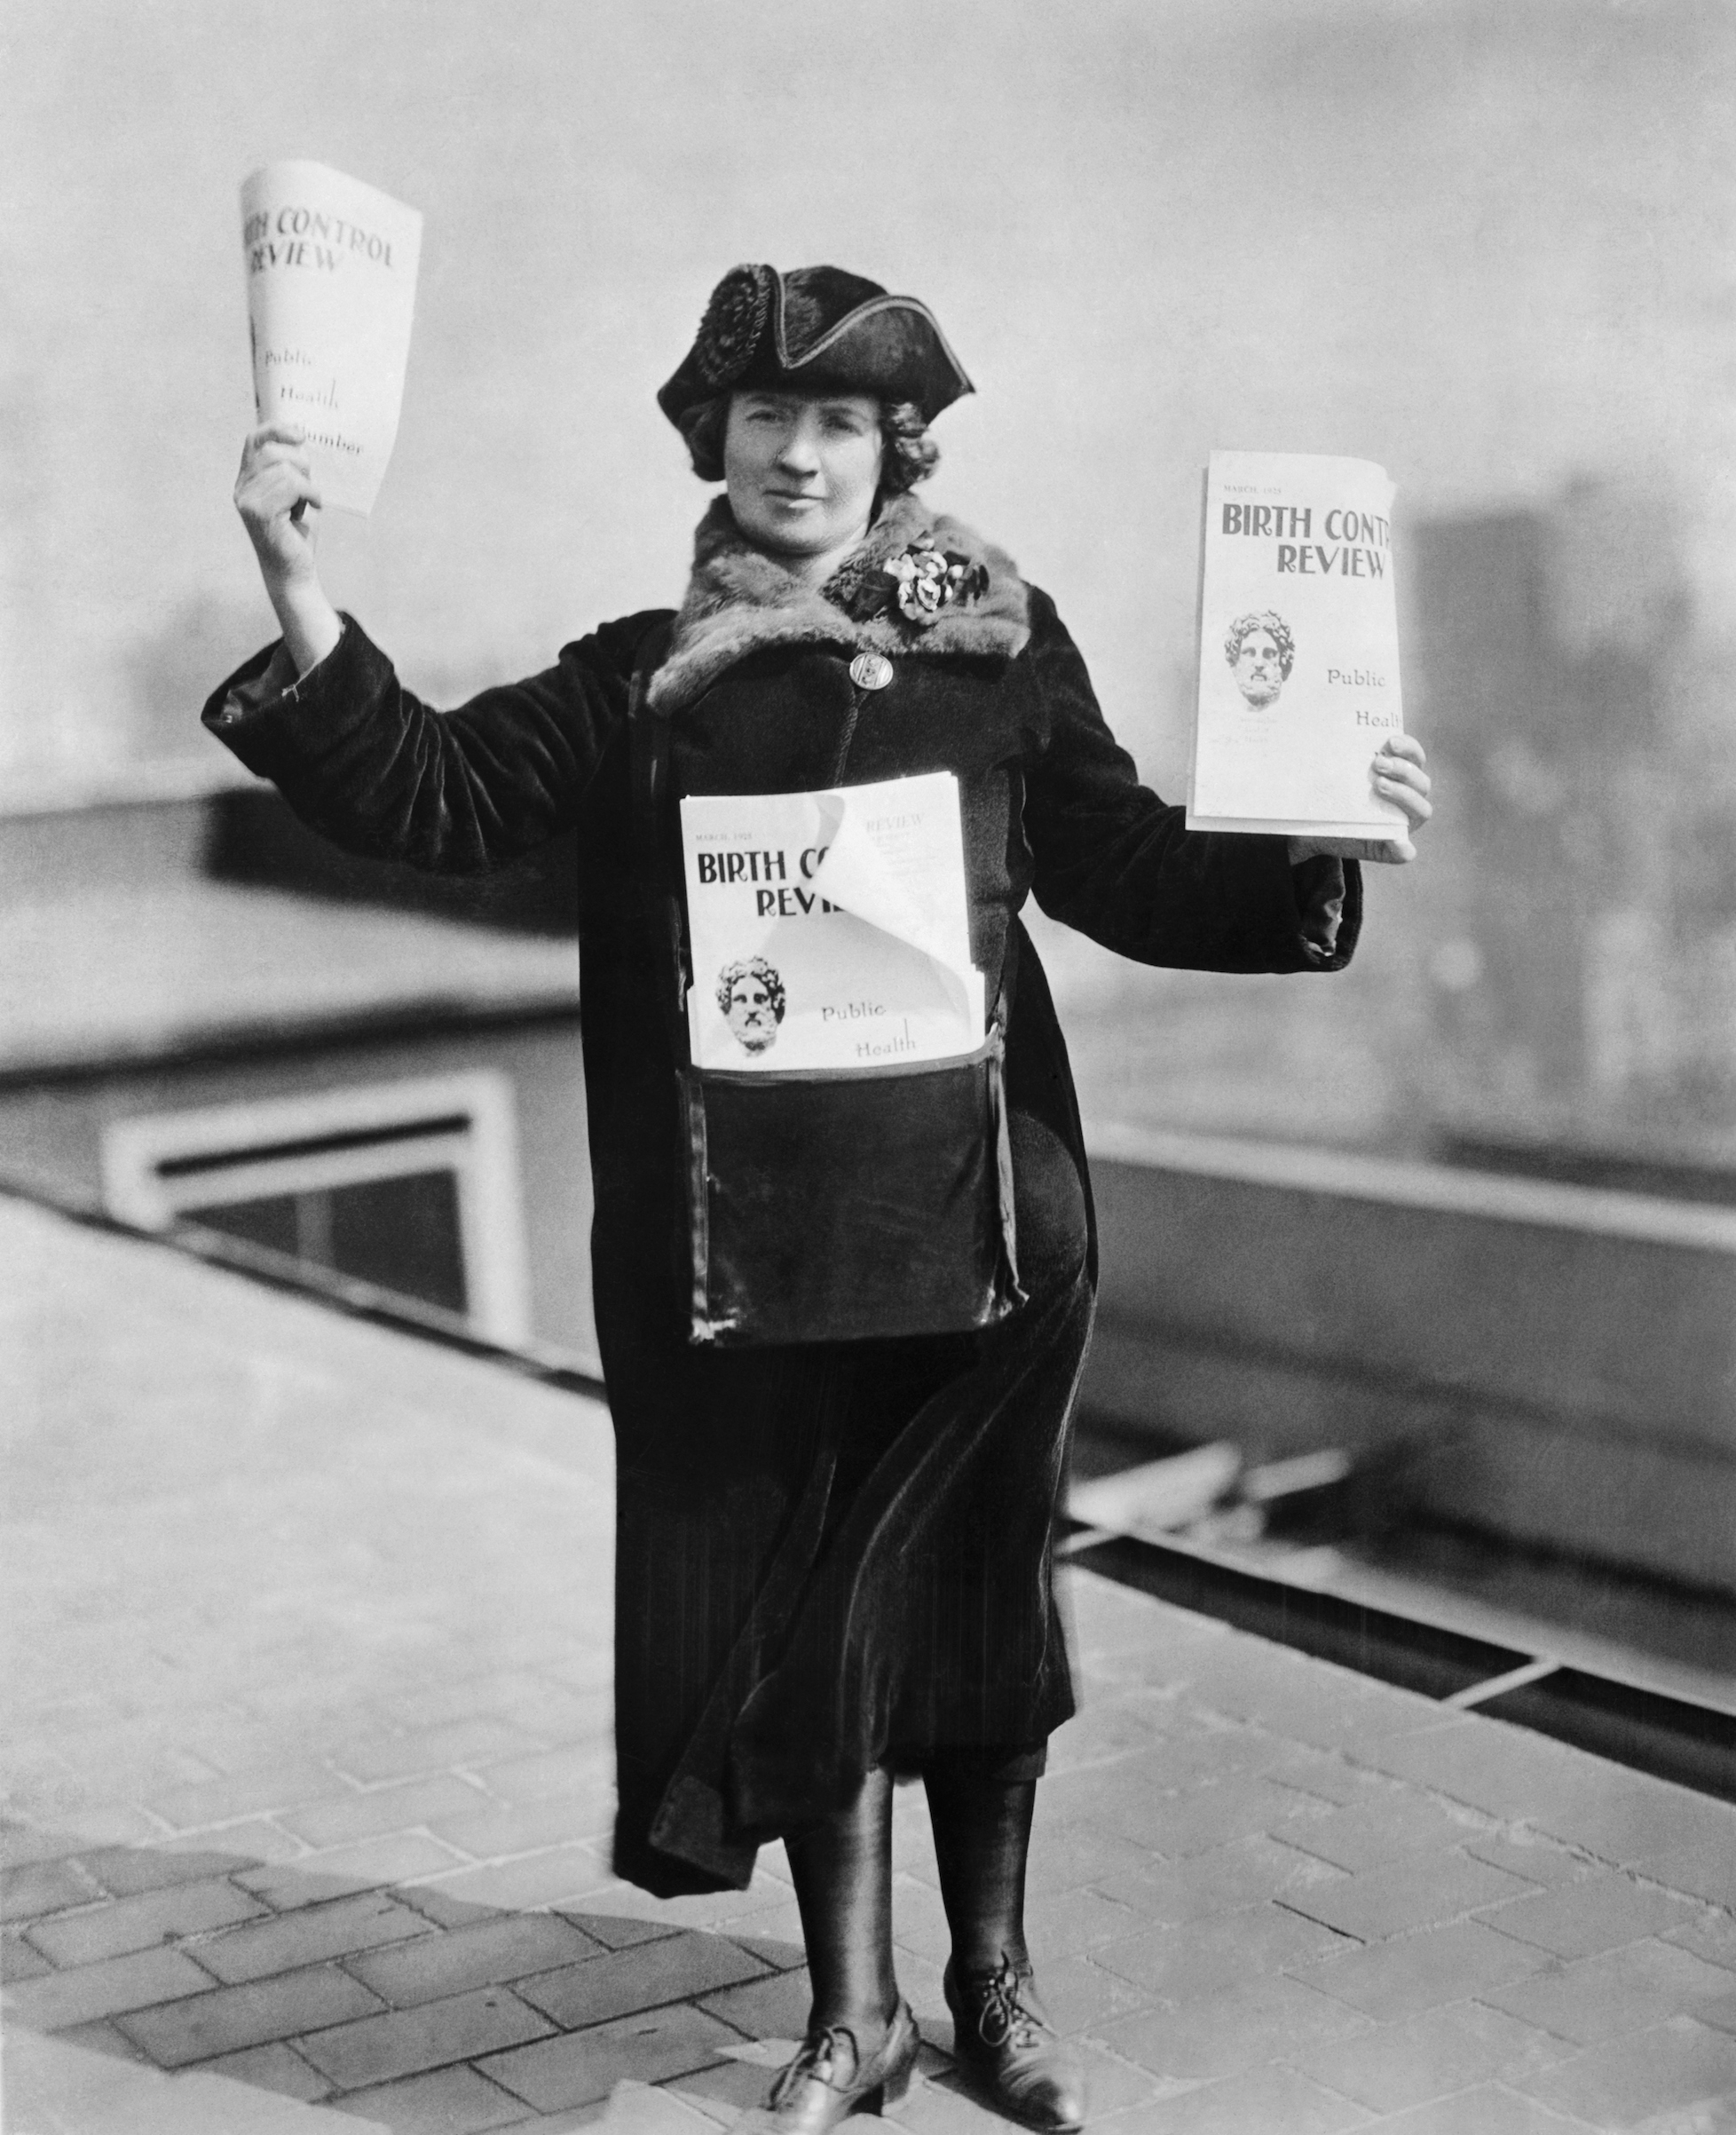 Kitty Marion ready to sell the Birth Control Review in the streets of New York, 1915. (Bettmann/Getty Images)